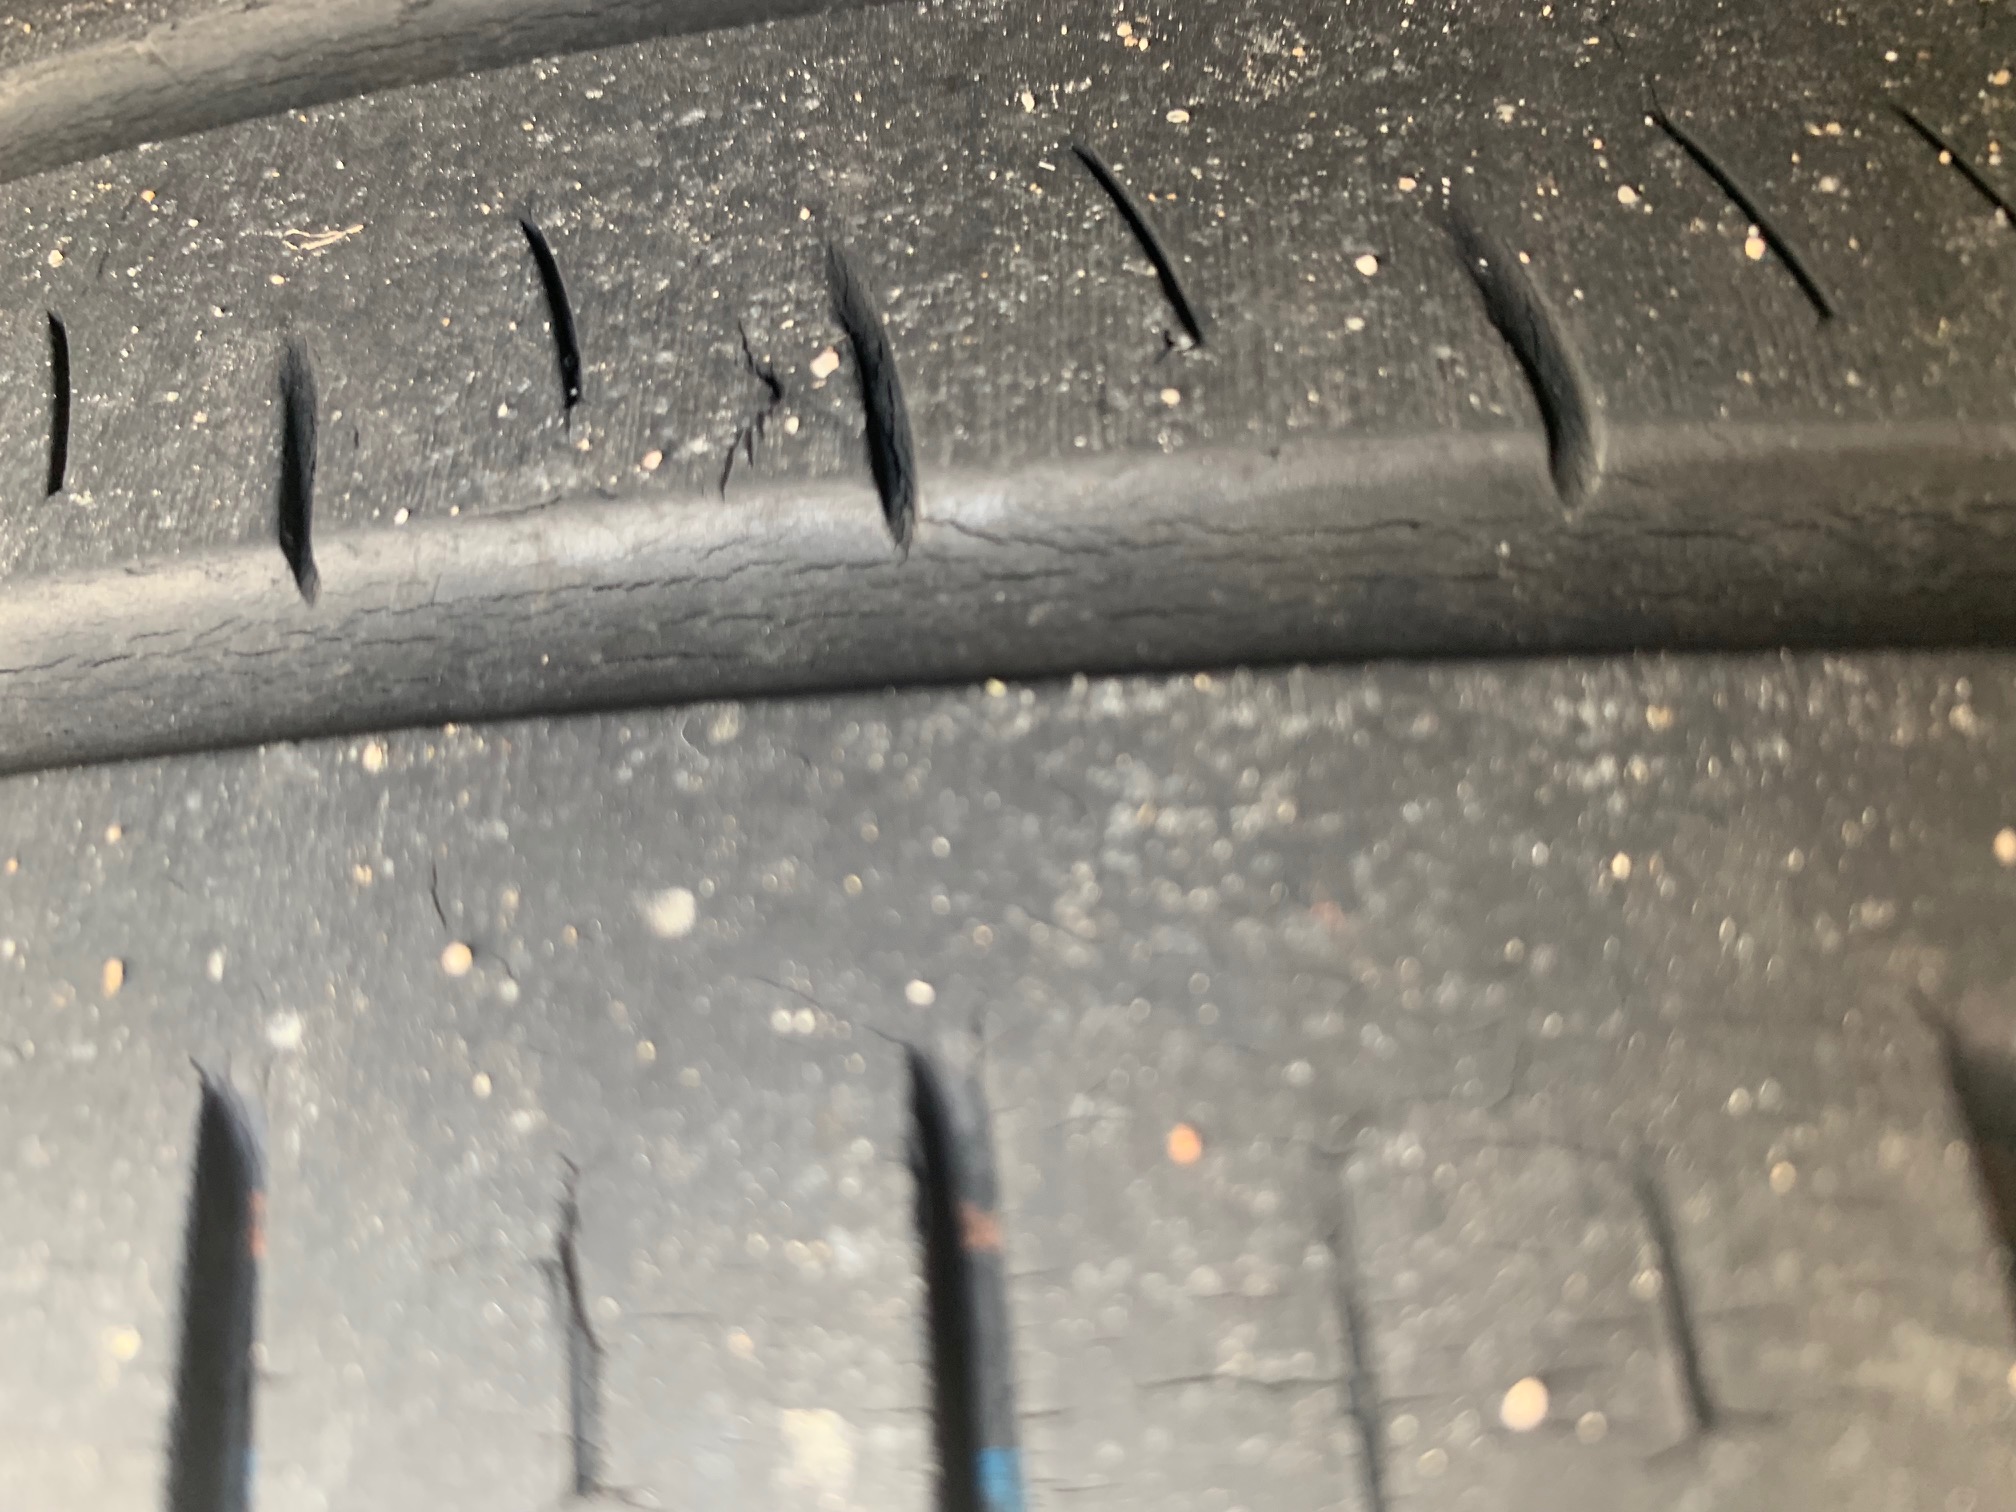 weather cracking tires